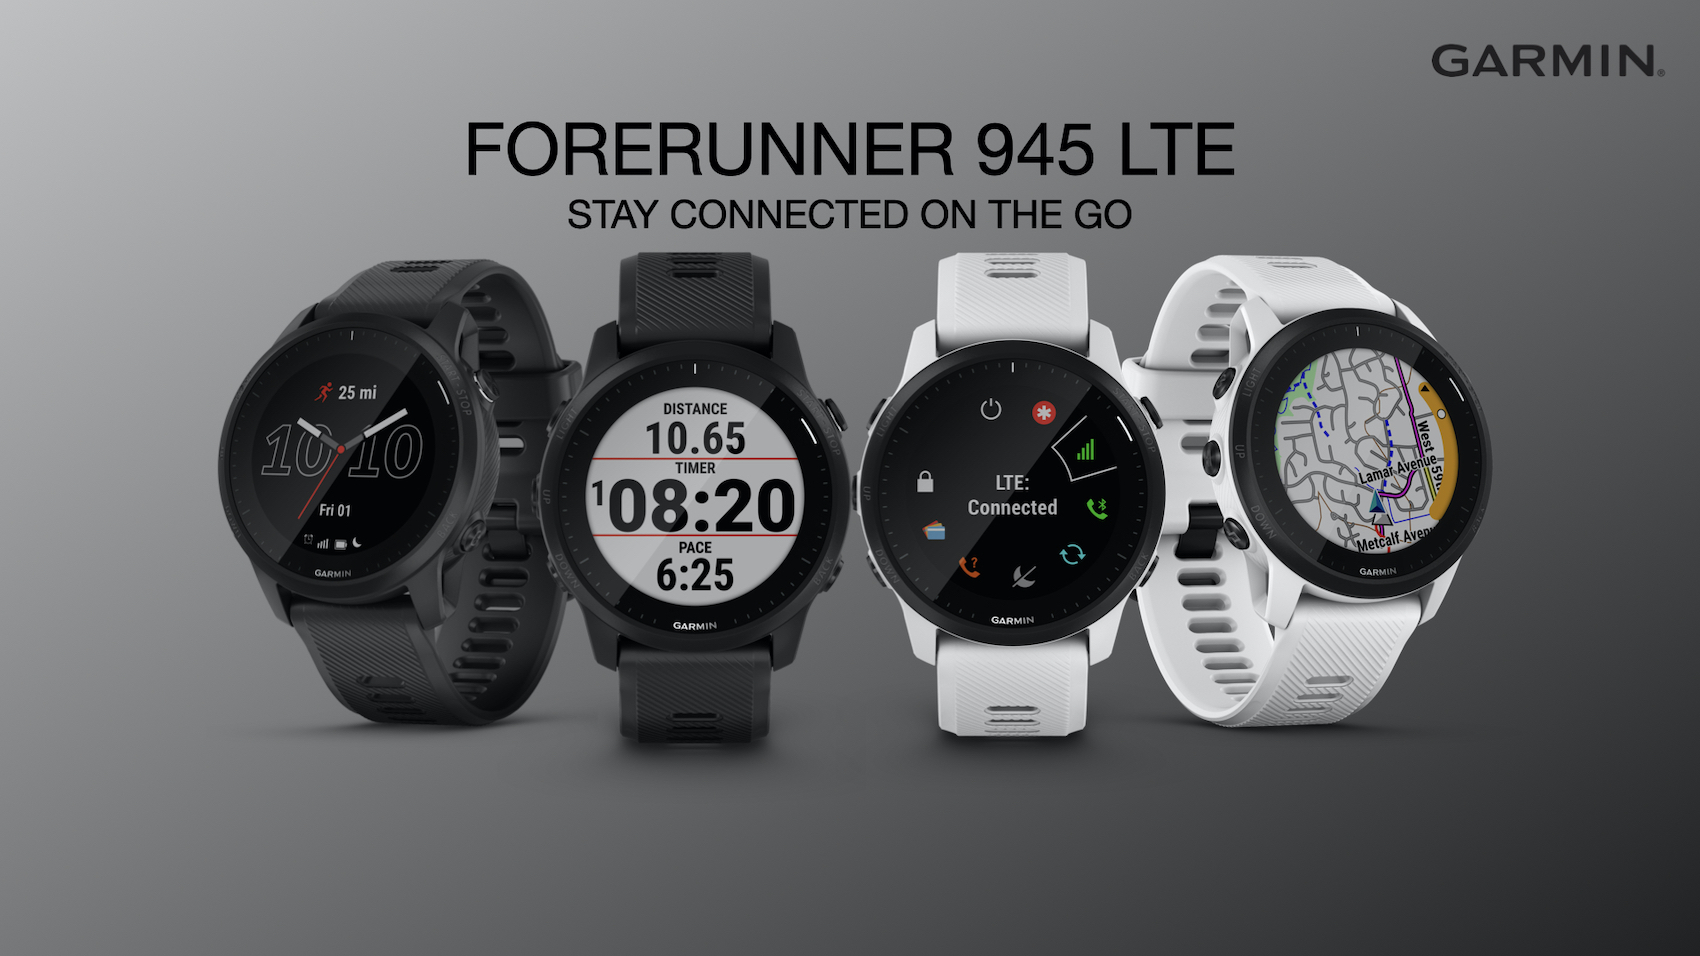 Garmin forerunner 945 lte what is the benefit of retina display on ipad